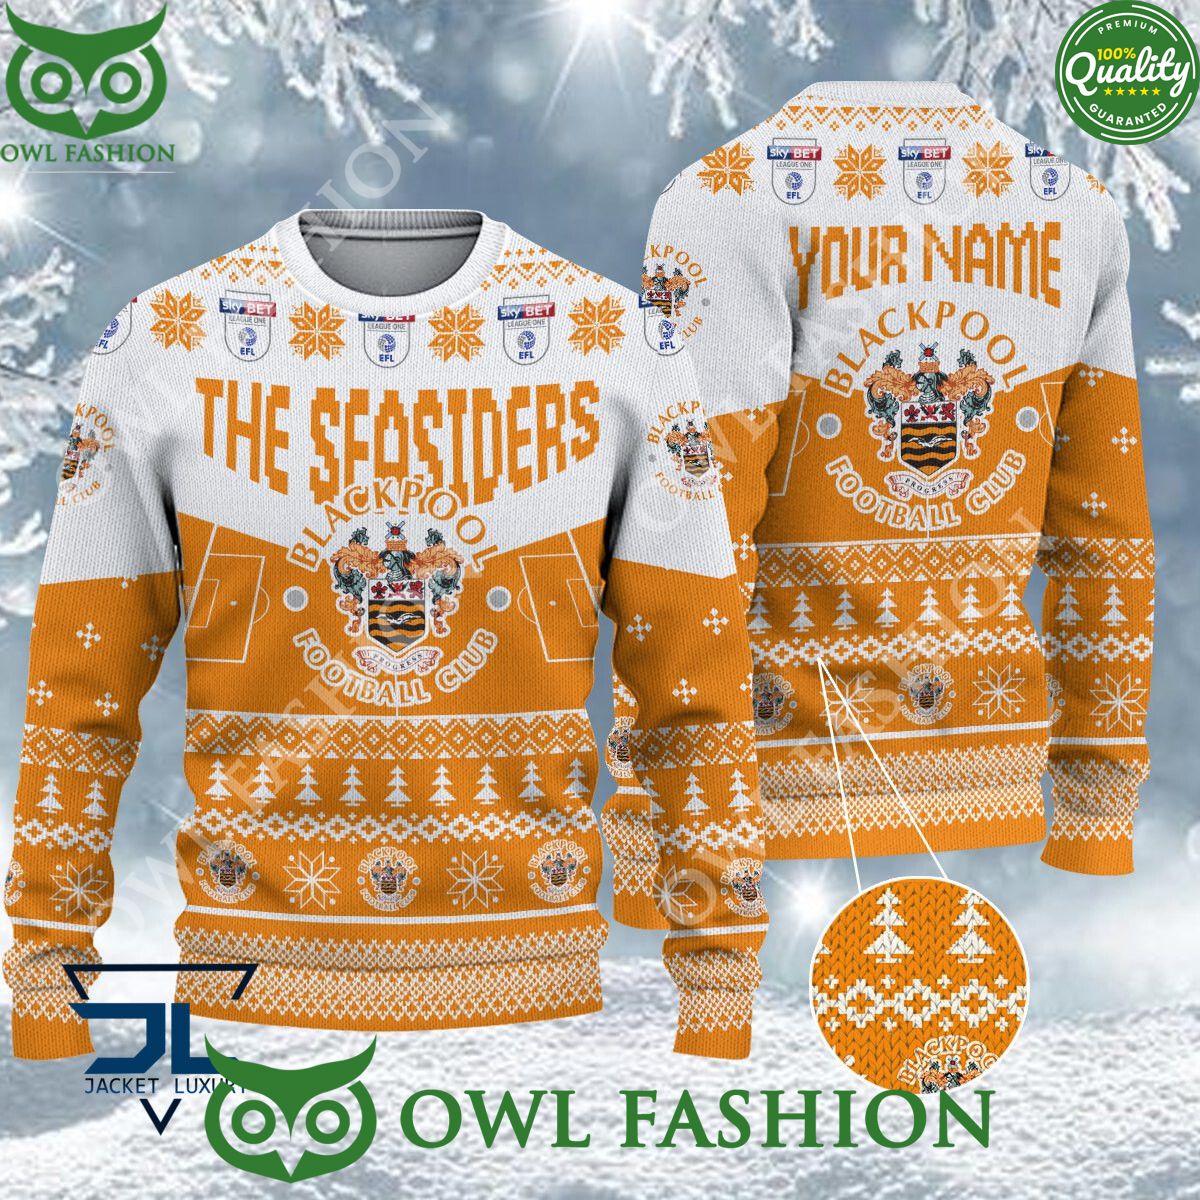 Cardiff City FC Christmas EFL Ugly Premier League Sweater Jumper Gift For  Men And Women - Banantees